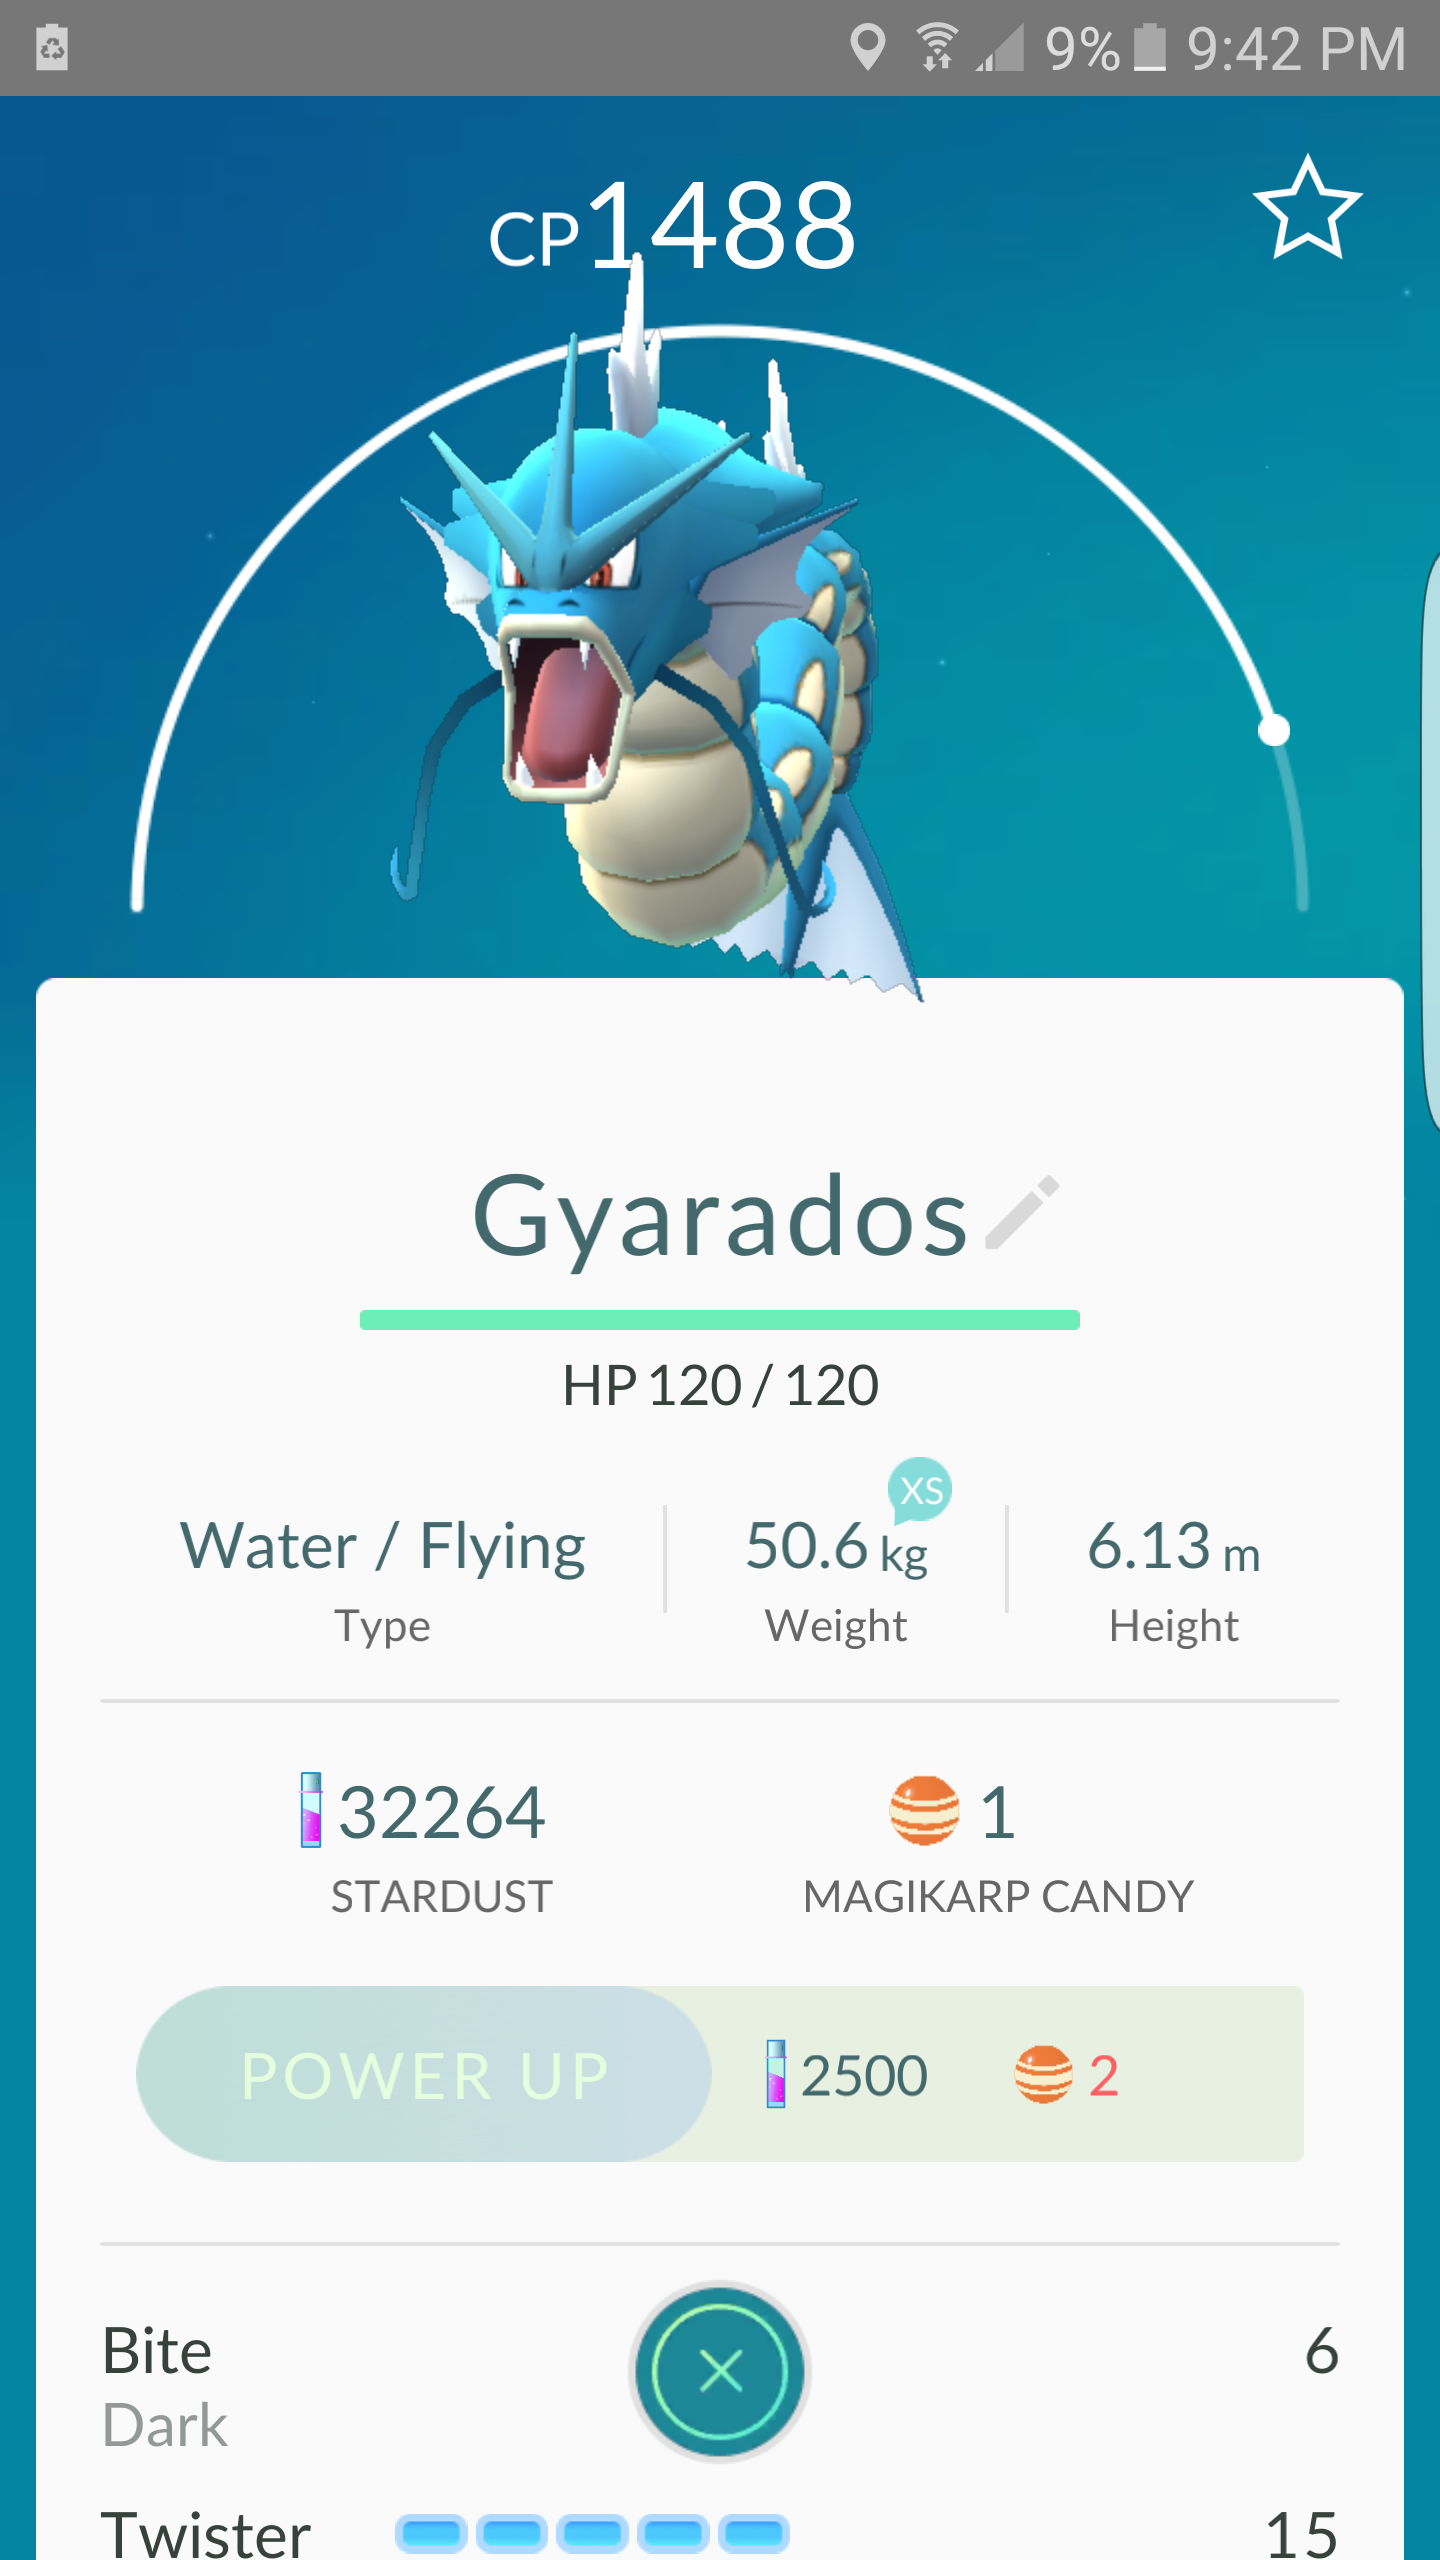 I got disappointed that my first Gyarados had Twister as it